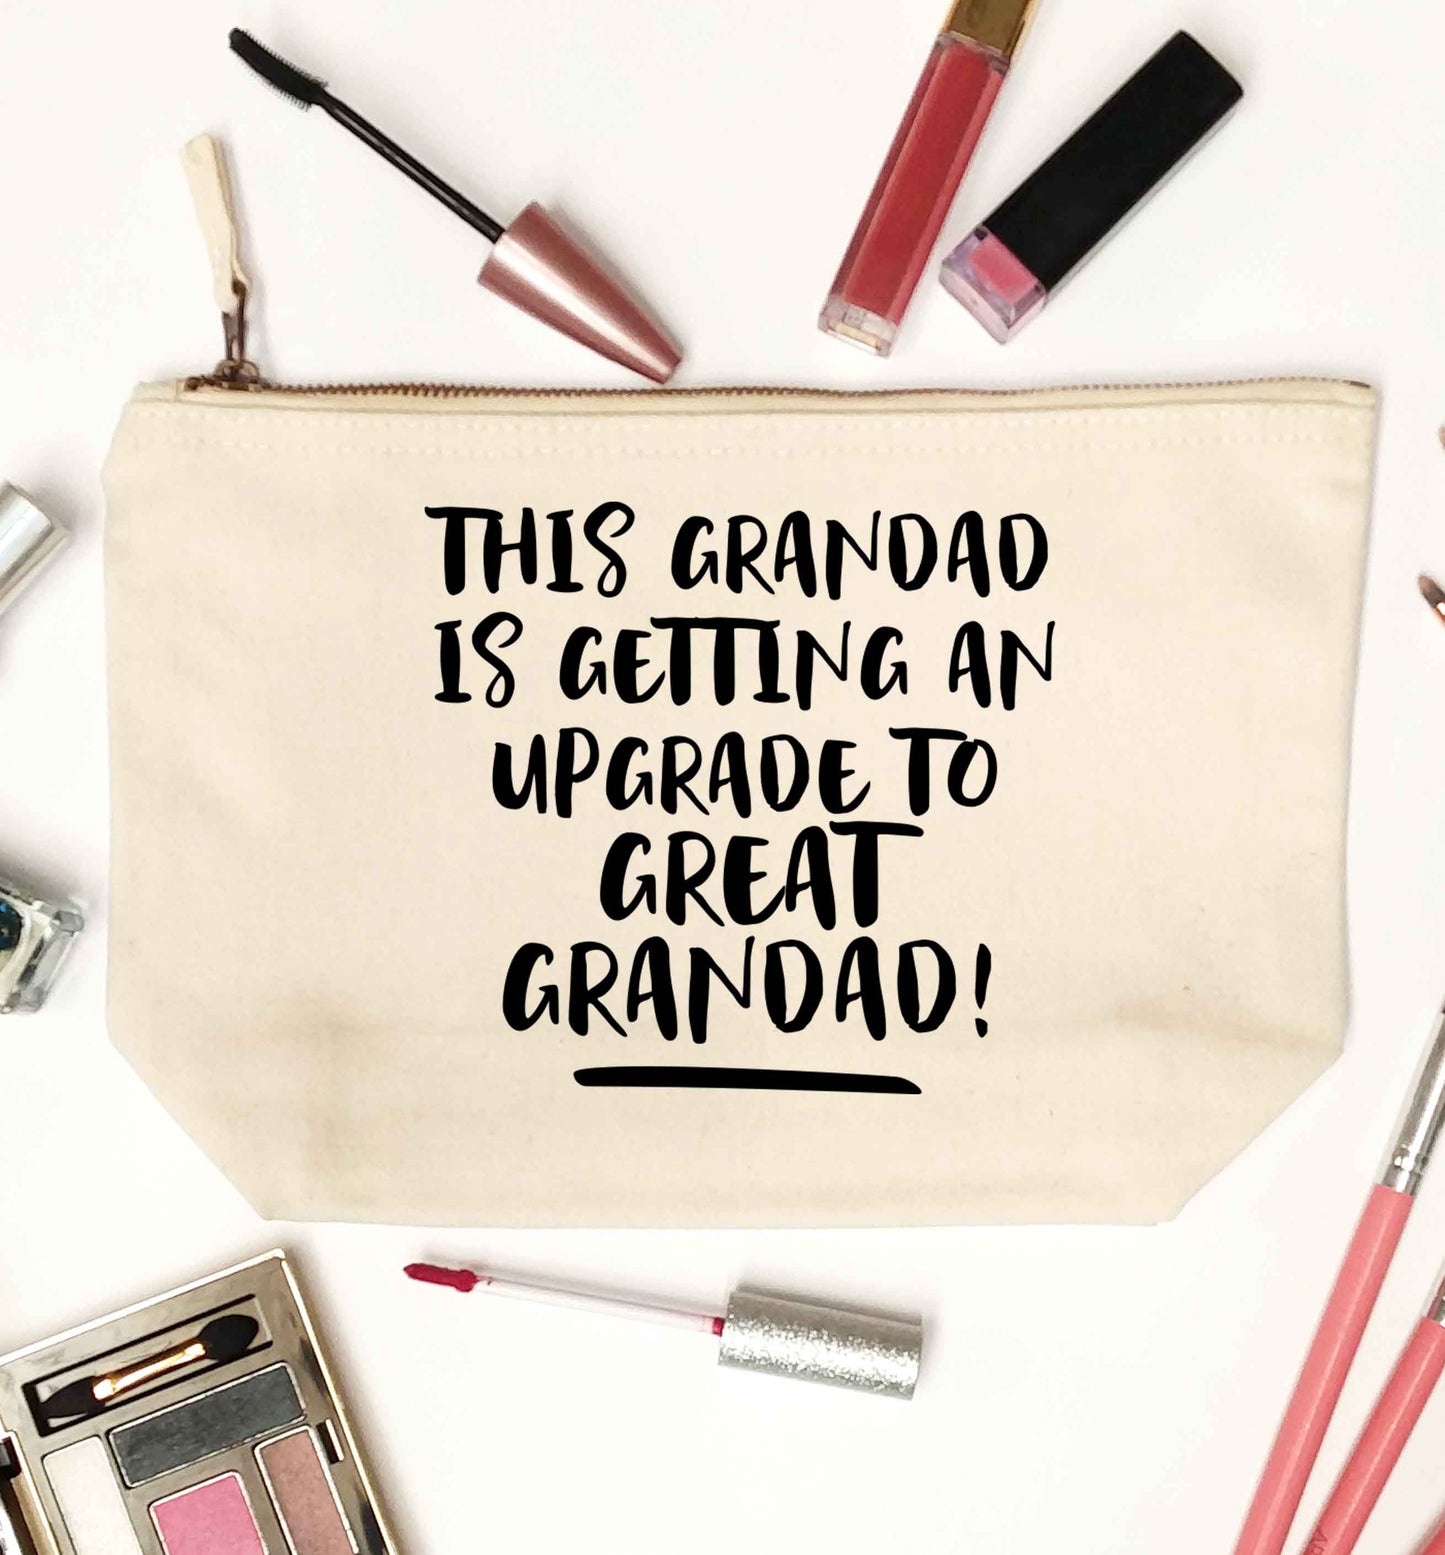 This grandad is getting an upgrade to great grandad! natural makeup bag